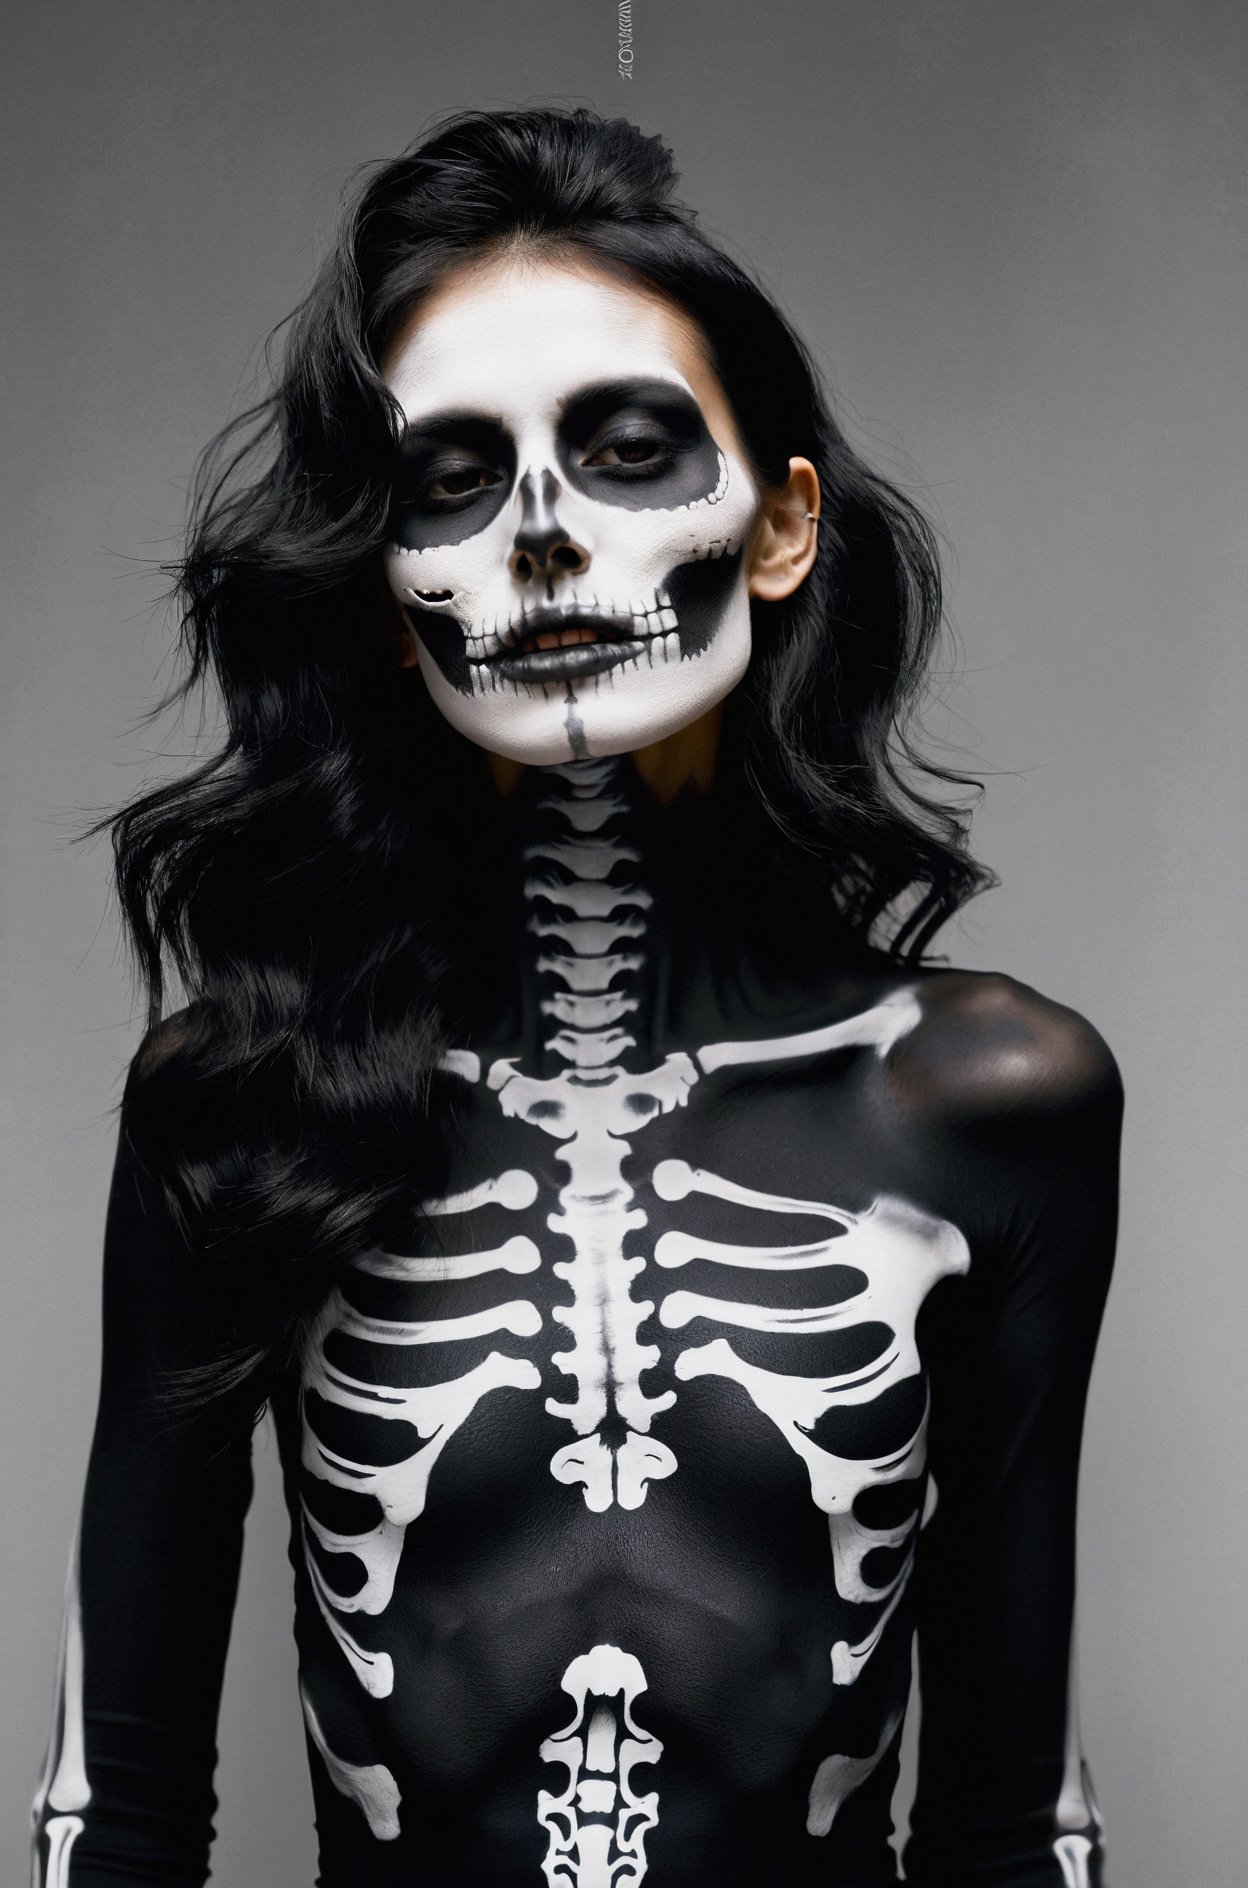 film grain texture,analog photography aesthetic,A woman with skeletal makeup, high-fashion portrait style, striking skull face paint emulating a skeleton, detailed black and white makeup covering face and neck, illusion of a skeletal structure, black hollows around the eyes, nose, and mouth evoking eye sockets and nasal cavity, shaded collarbones and vertebrae mimicking an x-ray effect, matte black attire blending with body art, minimalist backdrop enhancing makeup artistry, gothic-inspired aesthetic, somber yet dynamic expression, light skin tone contrasting with dark makeup, wavy tousled hair adding texture, artistic tribute to Day of the Dead or similar cultural celebrations.,